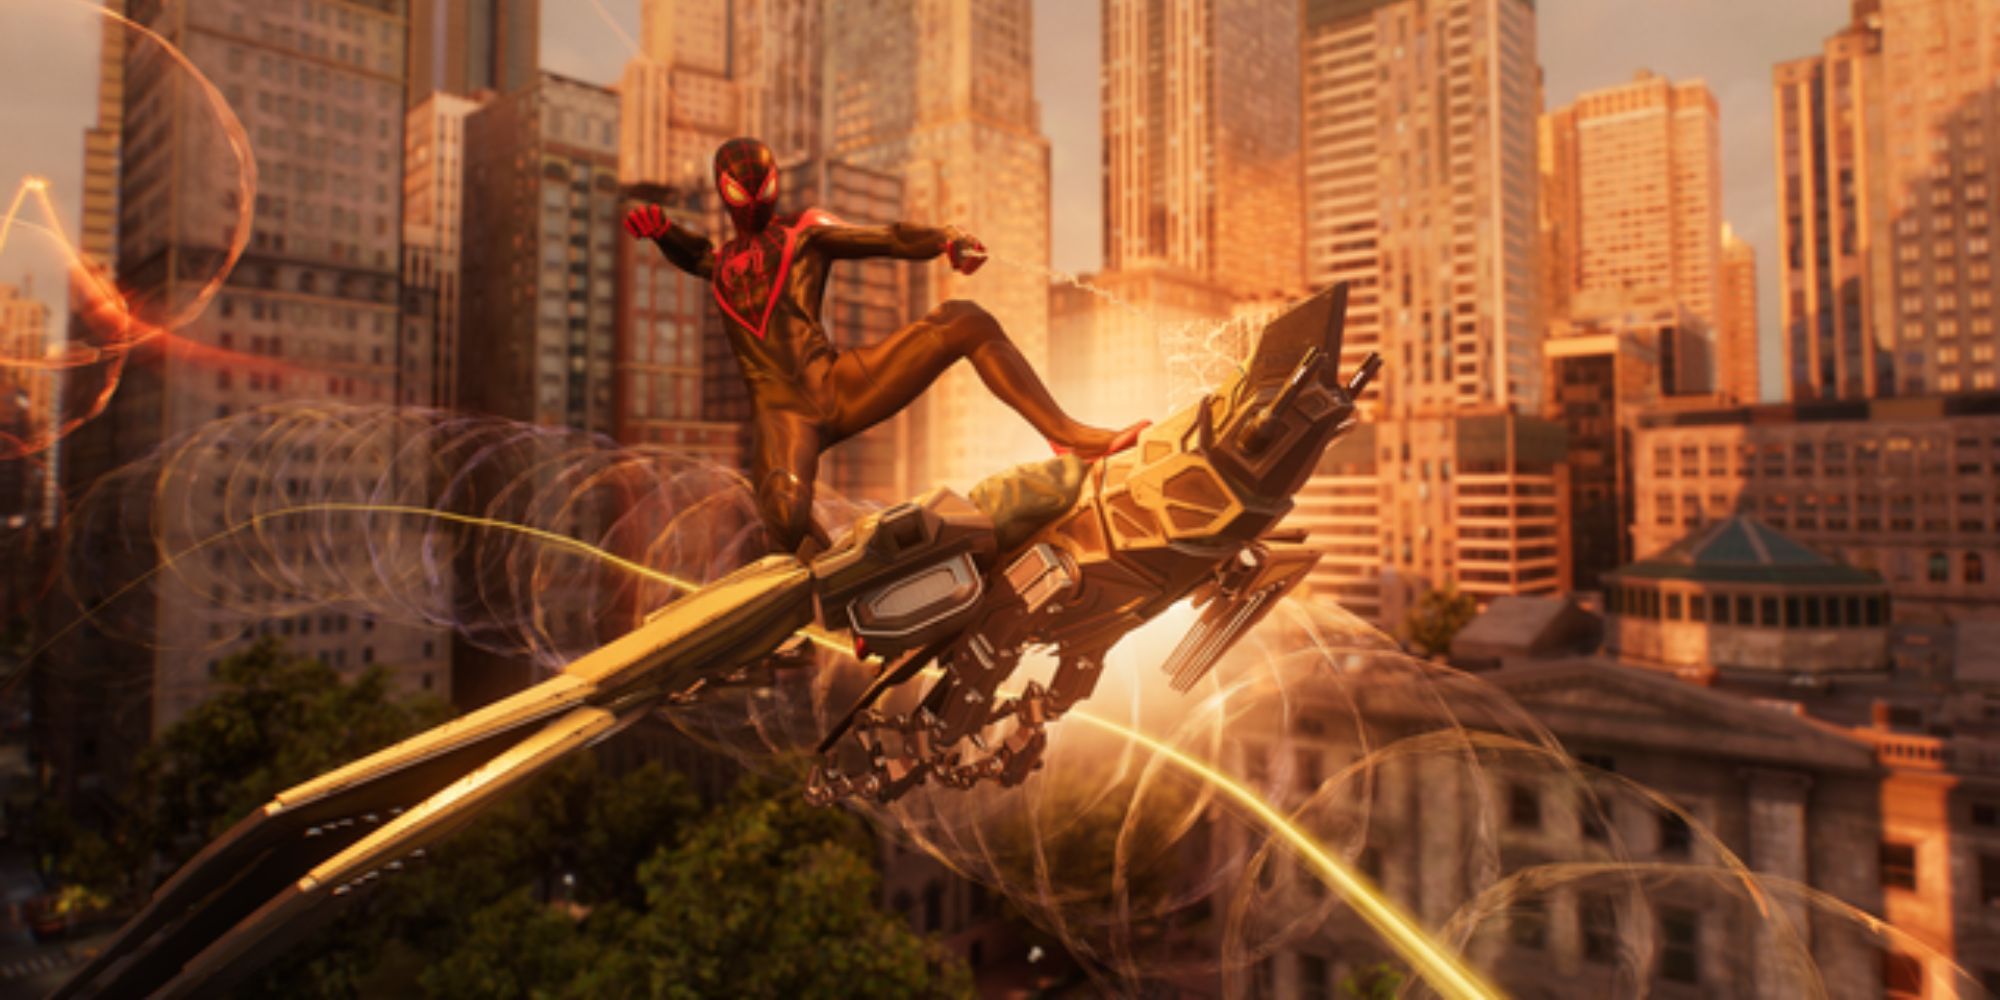 Still of Miles Morales as Spider-Man attacking a Talon Drone over the city in Spider-Man 2